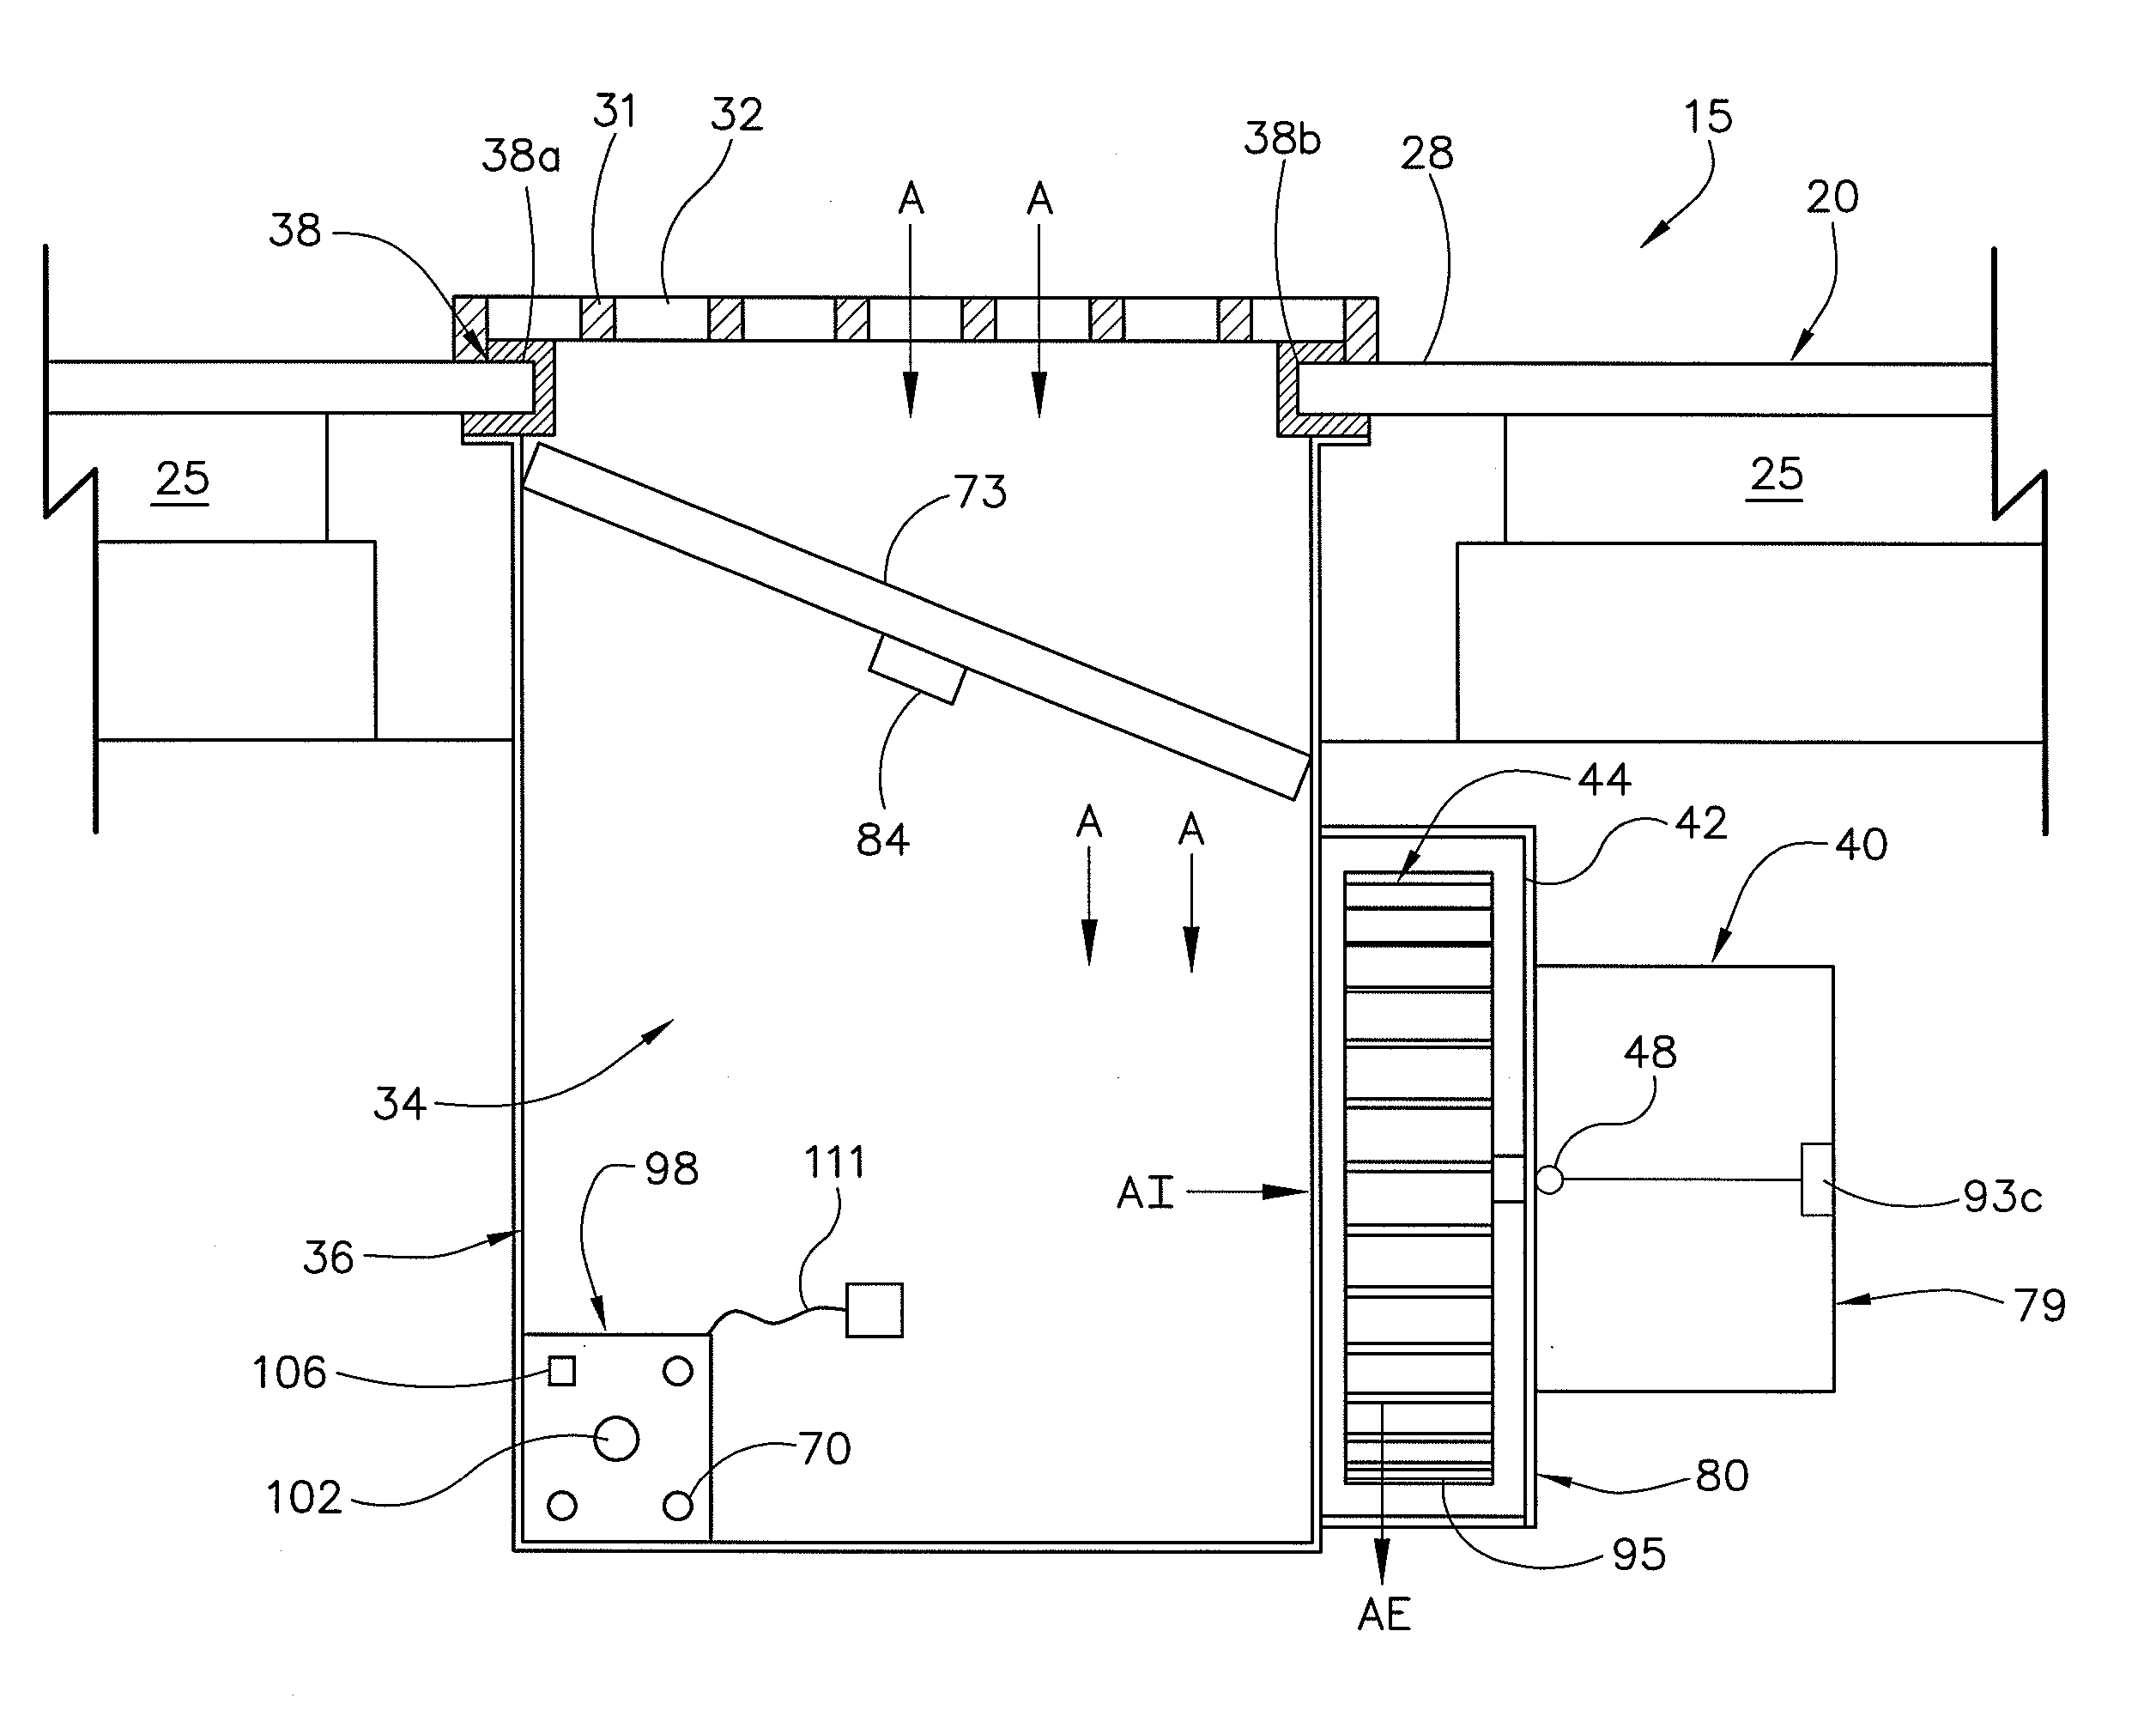 Cooking system with ventilator and blower